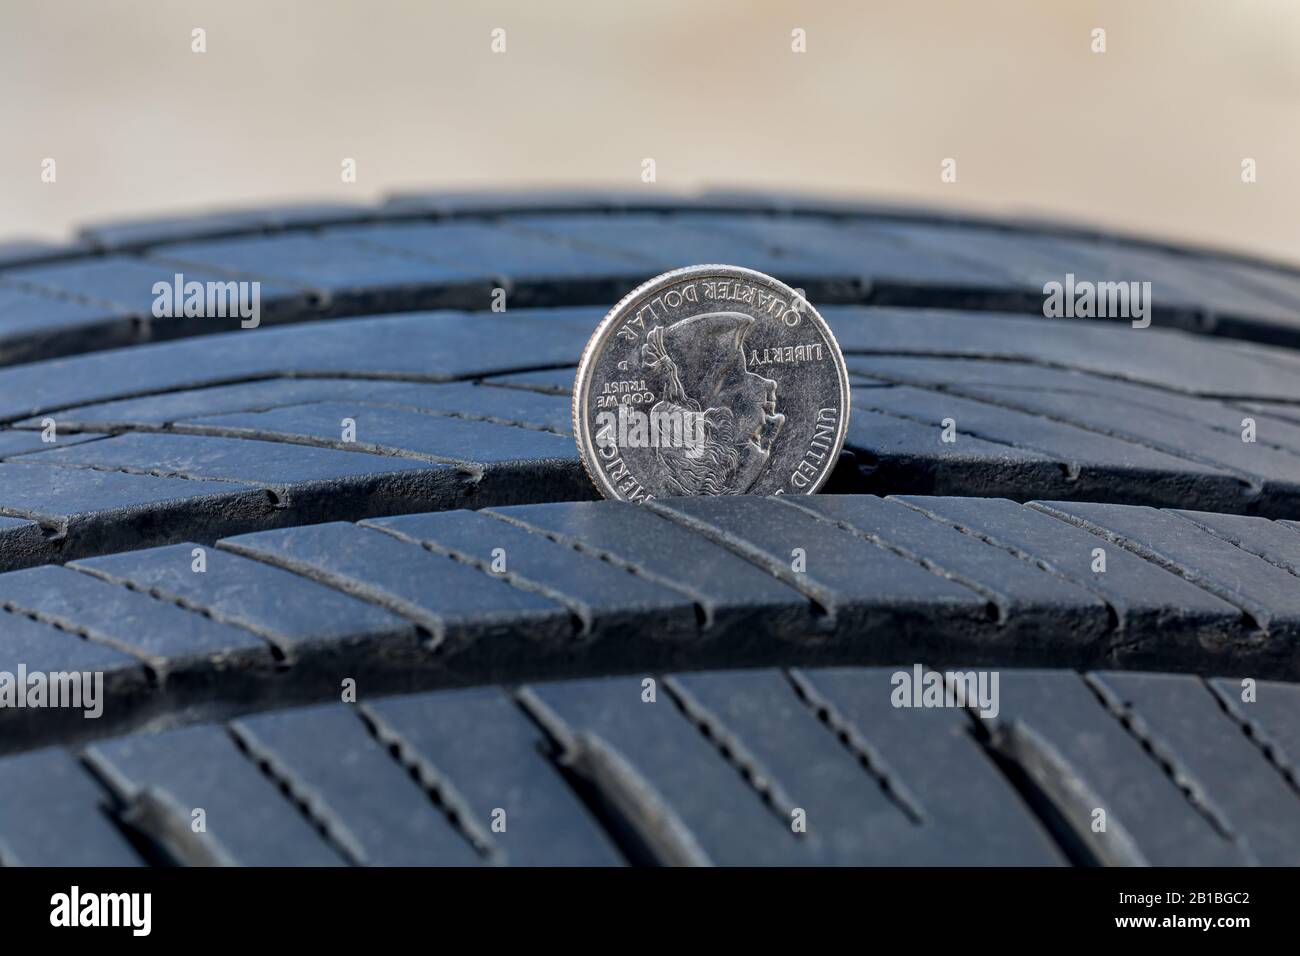 Closeup of checking tire tread wear depth of old tire using a quarter coin. Concept of automobile safety, maintenance and repair Stock Photo